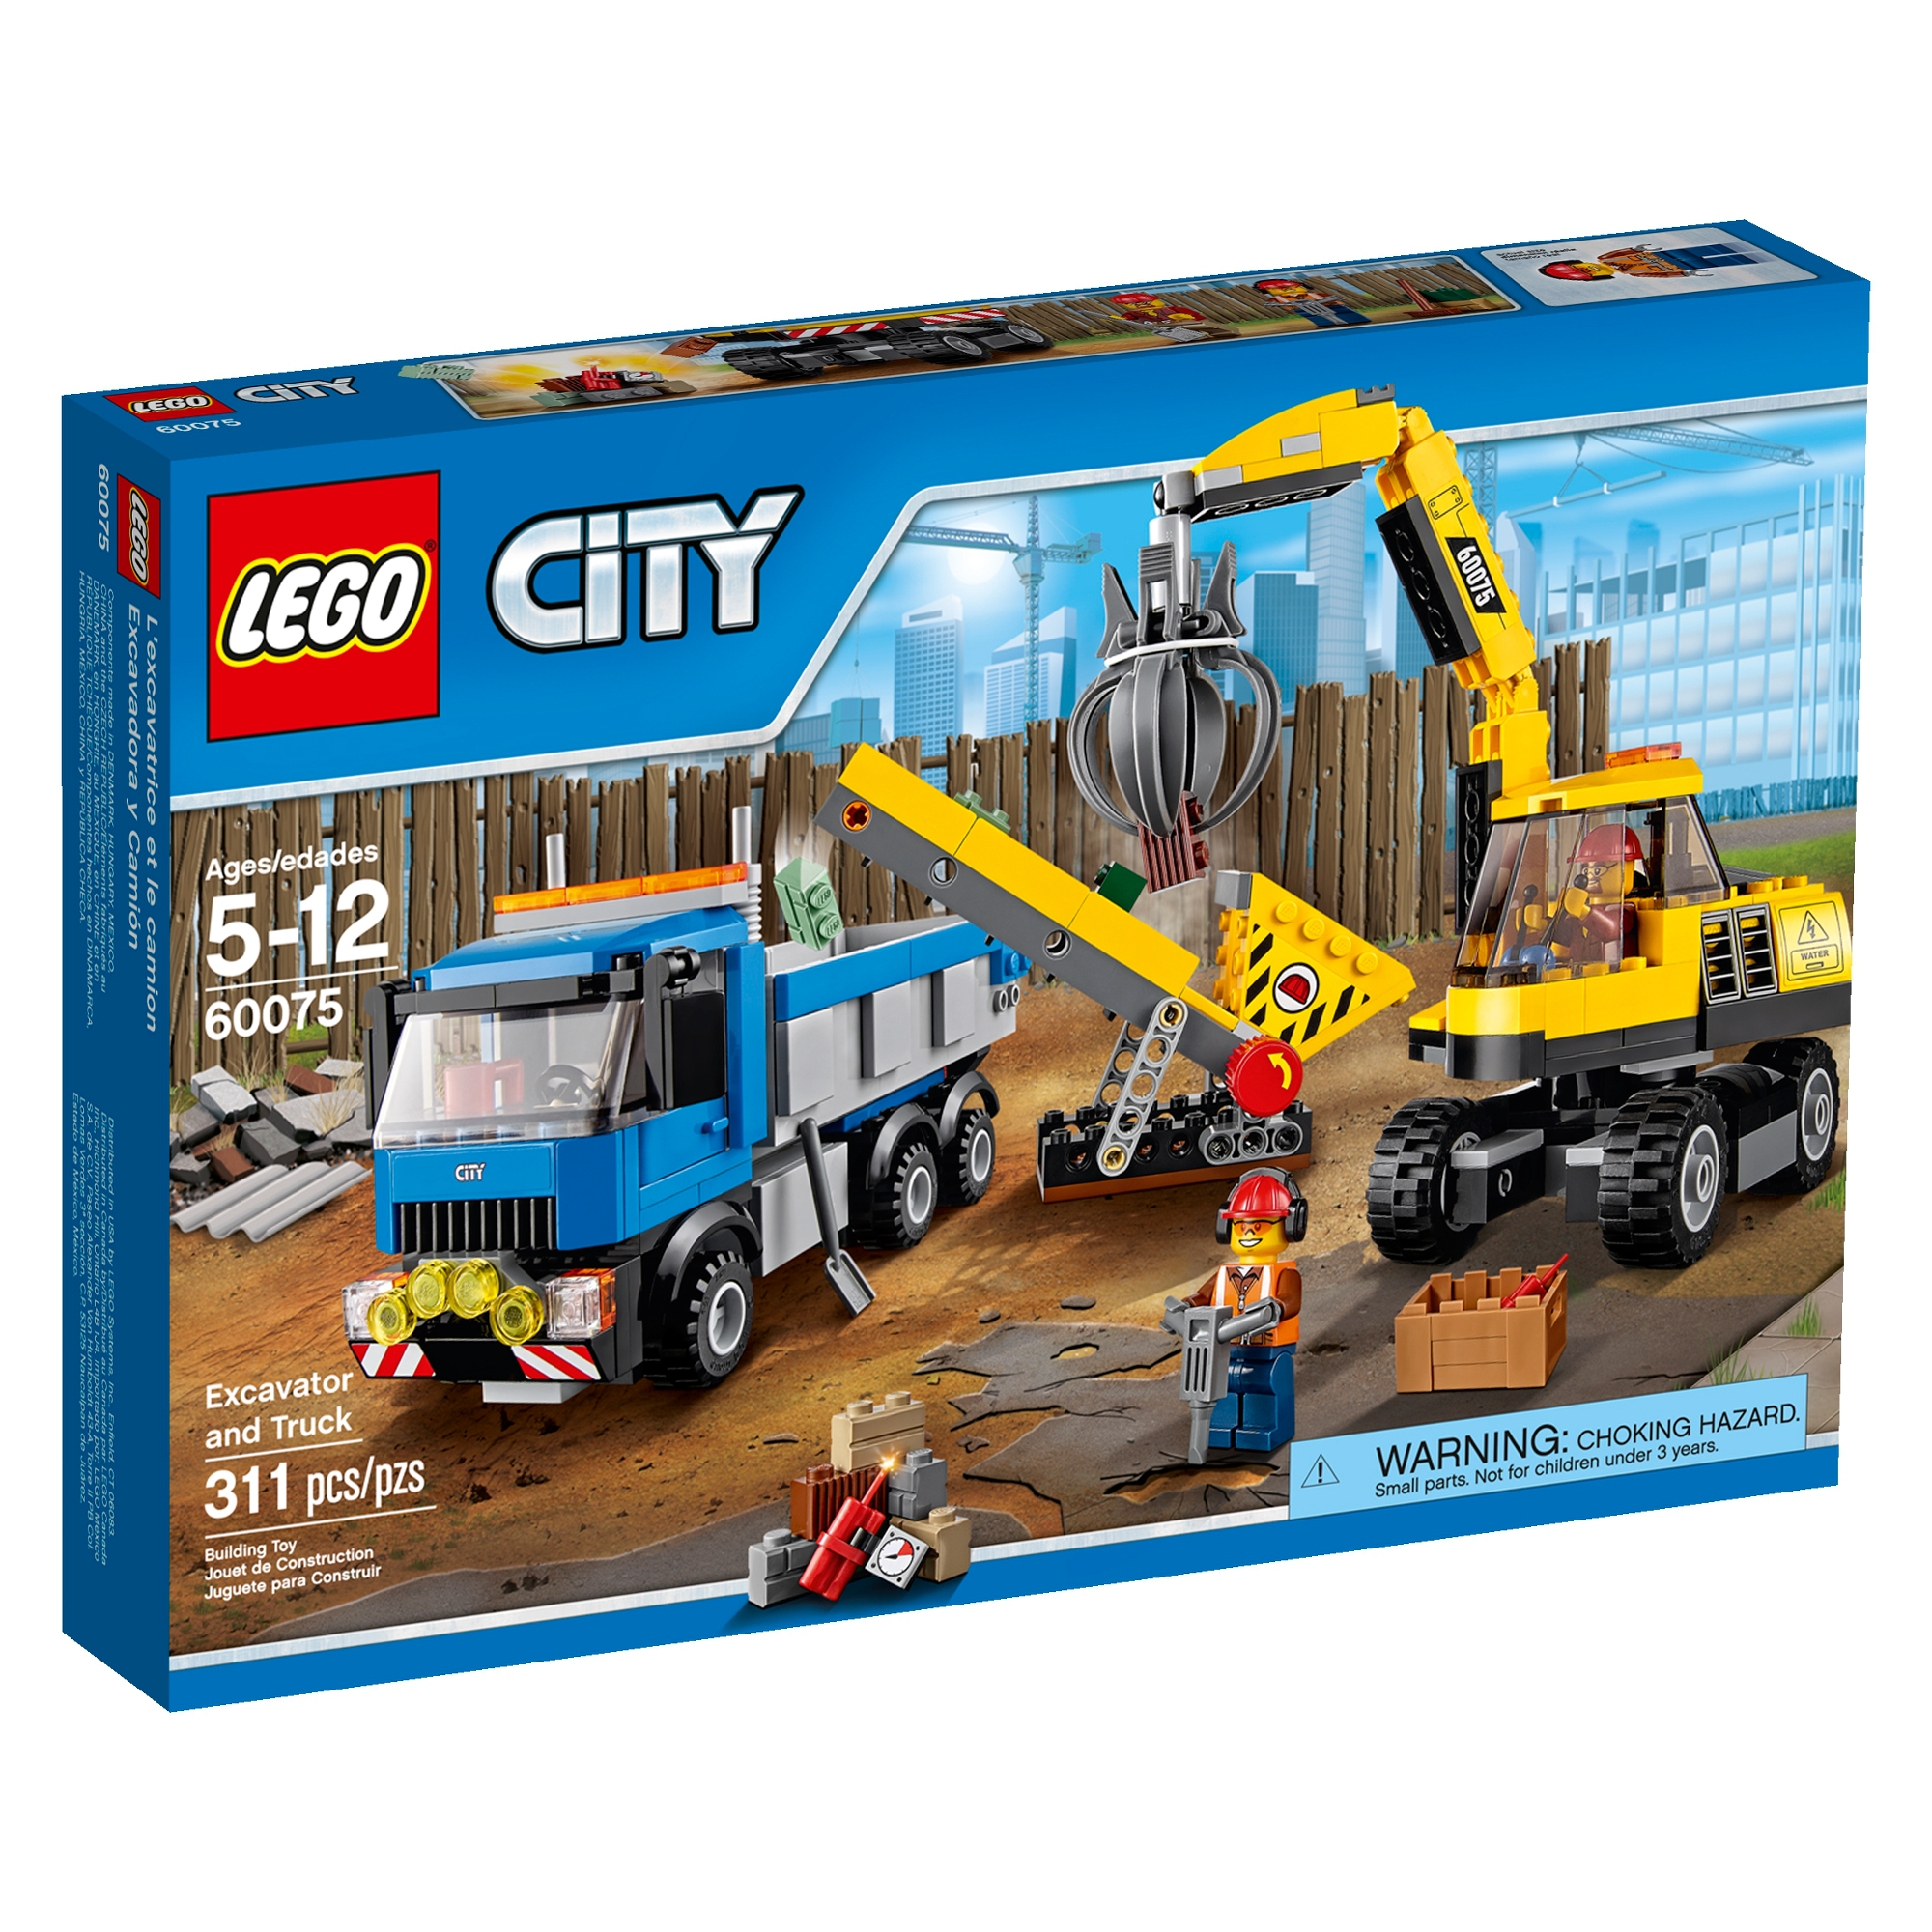 LEGO City Excavator and Truck   Toys & Games   Blocks & Building Sets